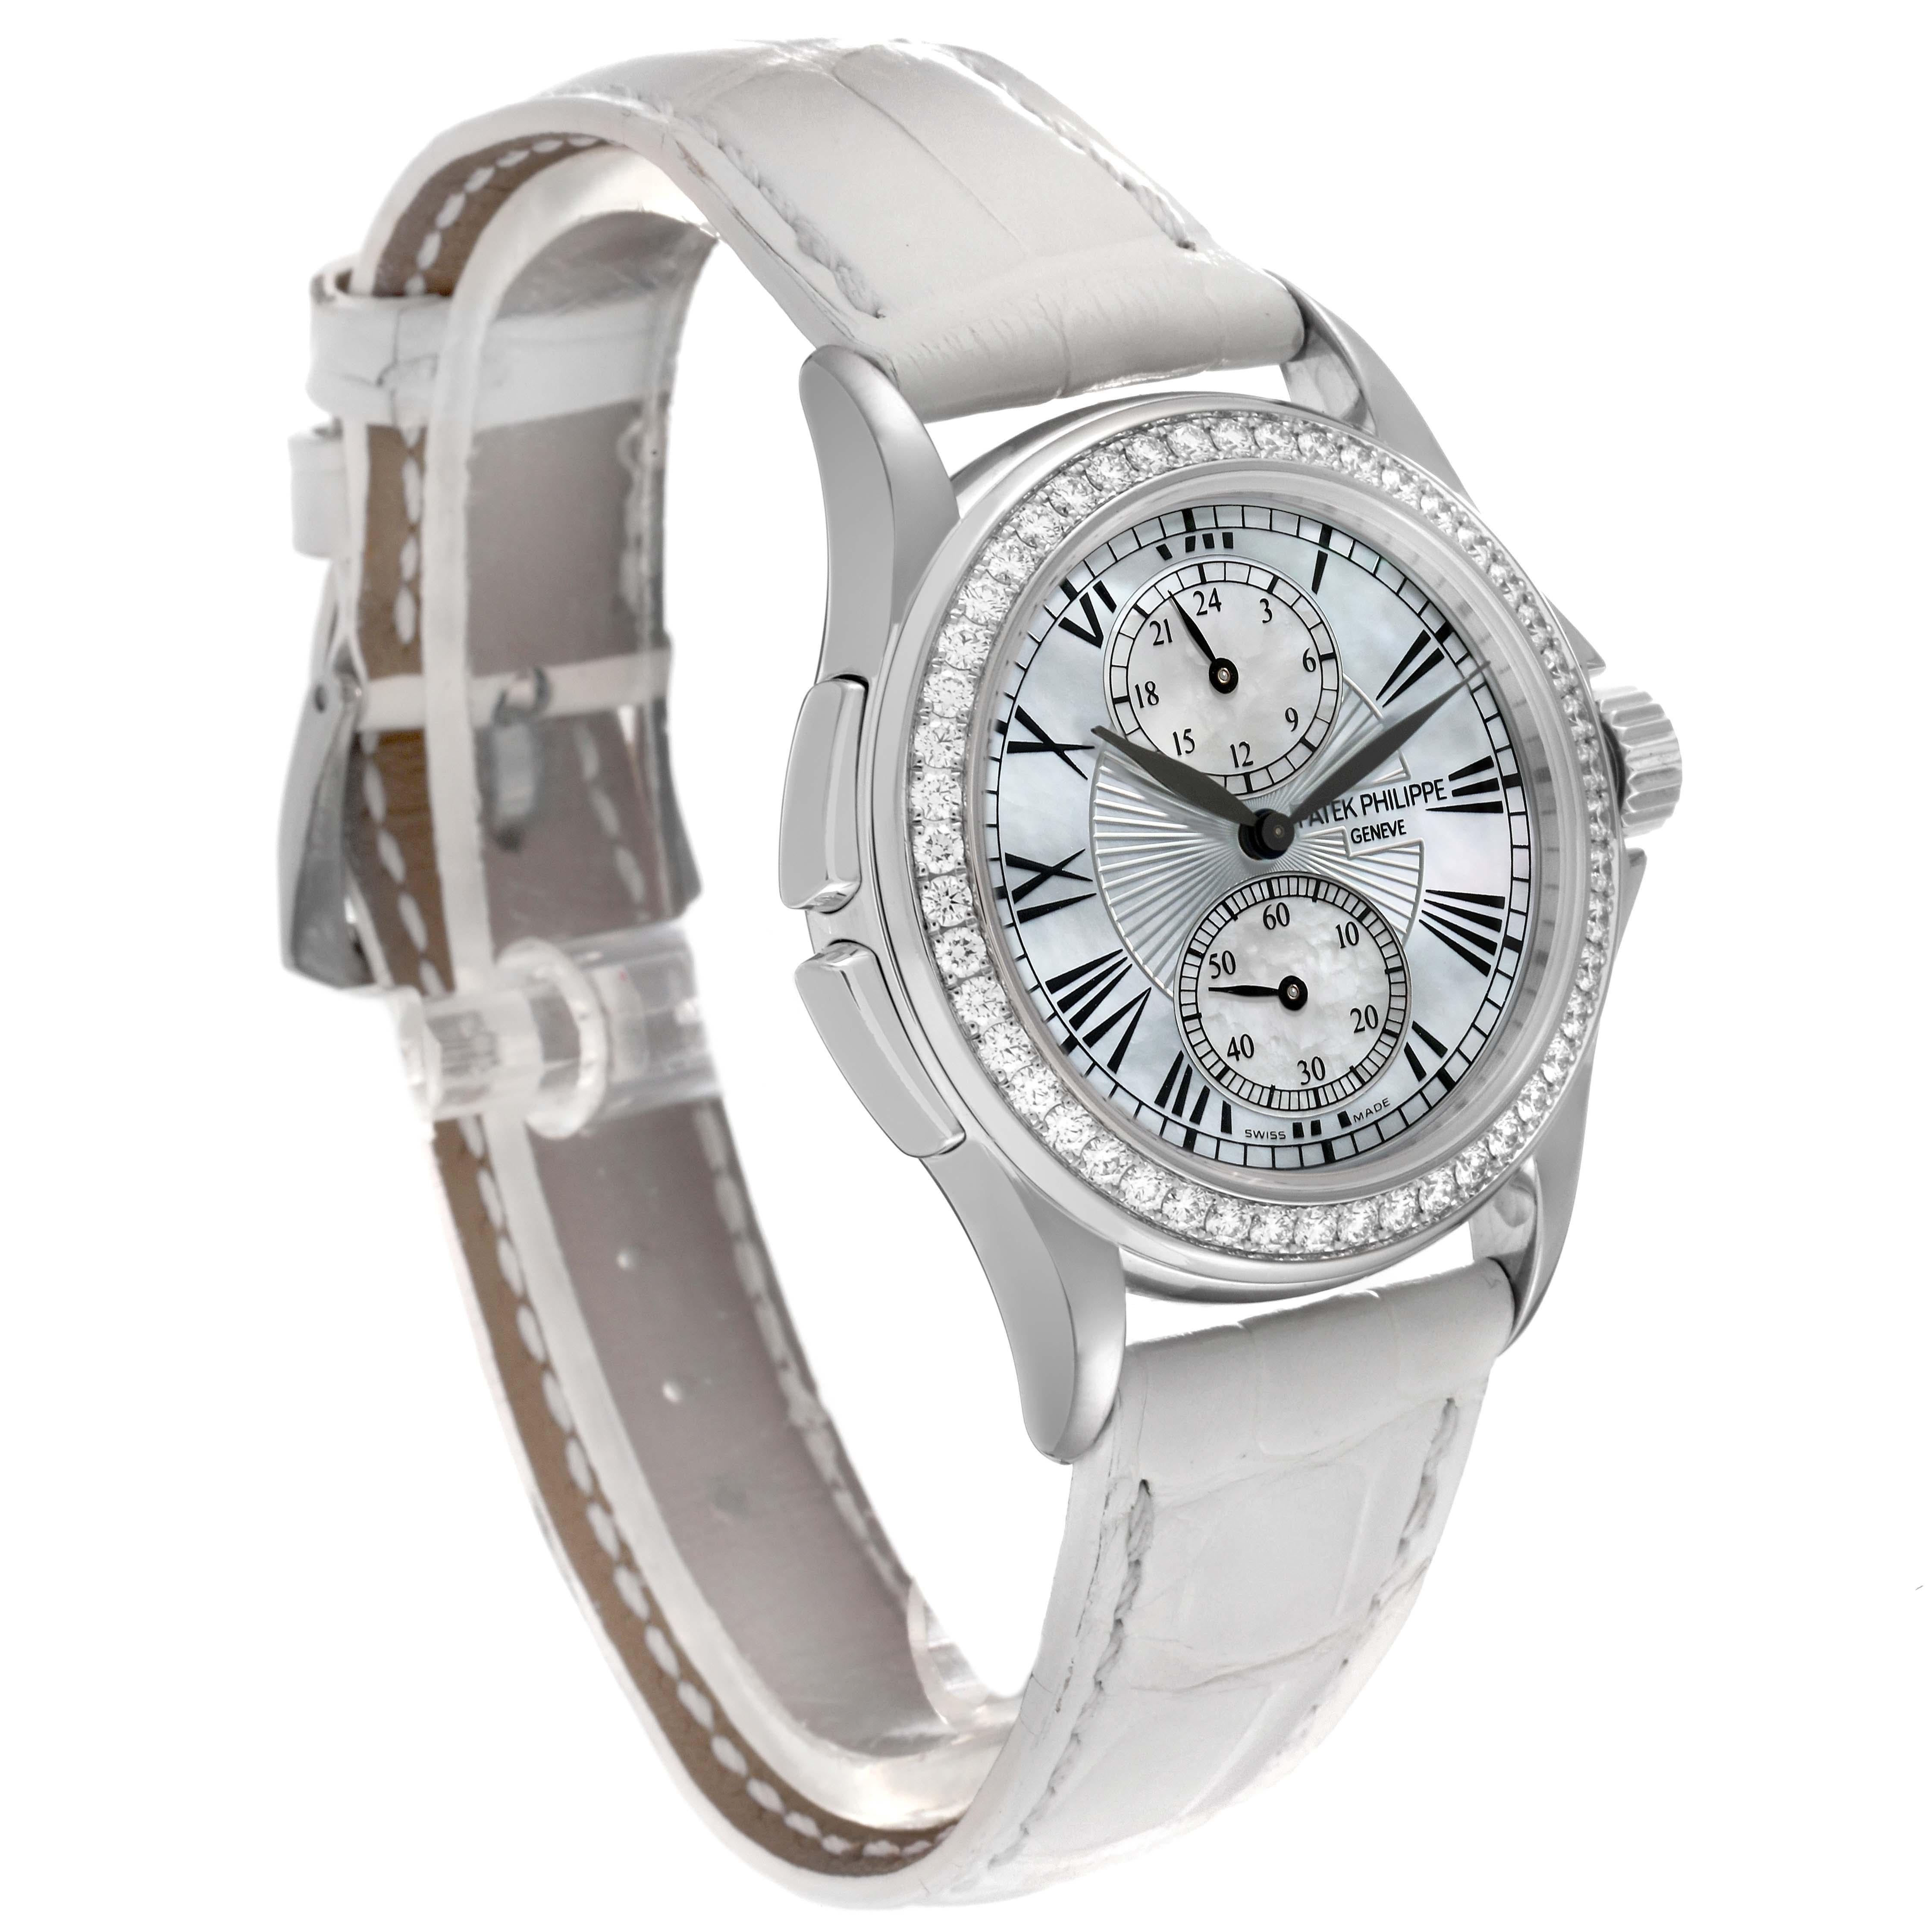 Patek Philippe Calatrava Travel Time White Gold Mother of Pearl Diamond Watch For Sale 3